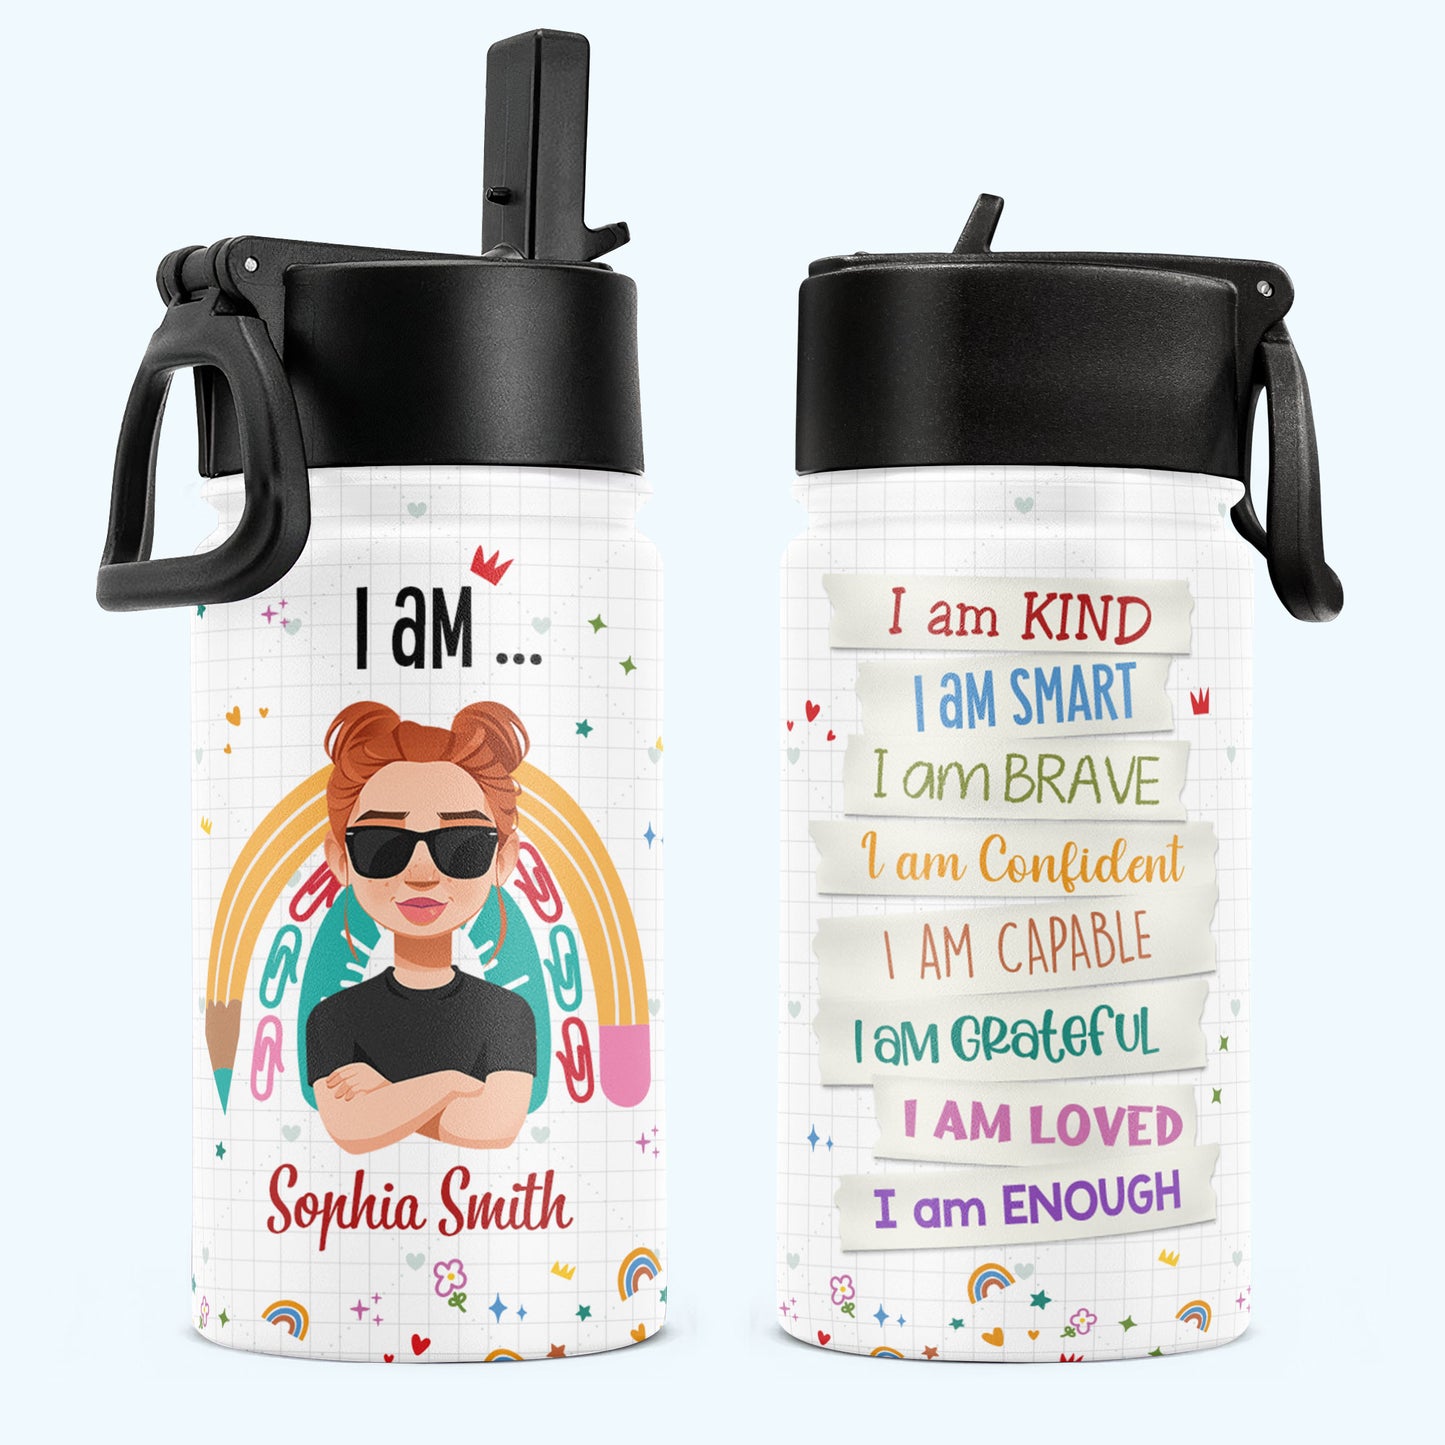 Smart Loved Brave Confident - Personalized Kids Water Bottle With Straw Lid